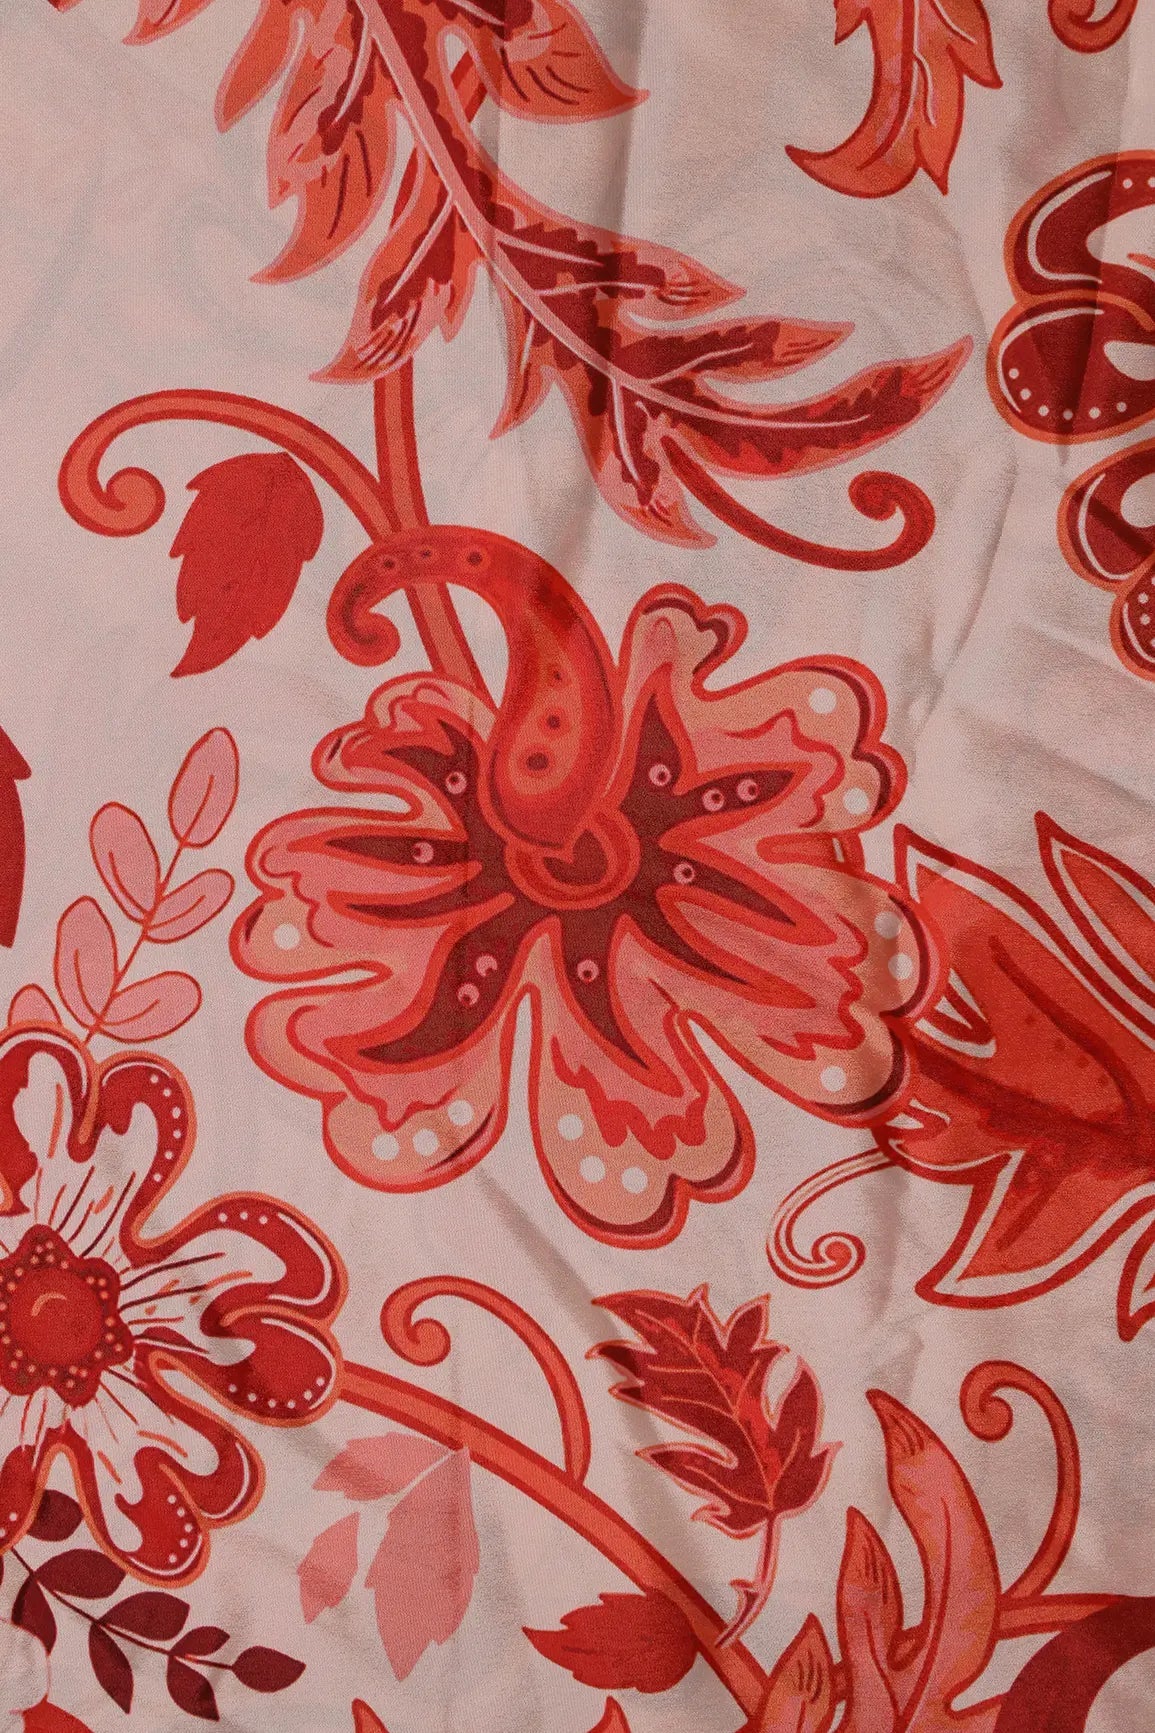 Rust Orange And Cream Floral Pattern Digital Print On French Crepe Fabric - doeraa